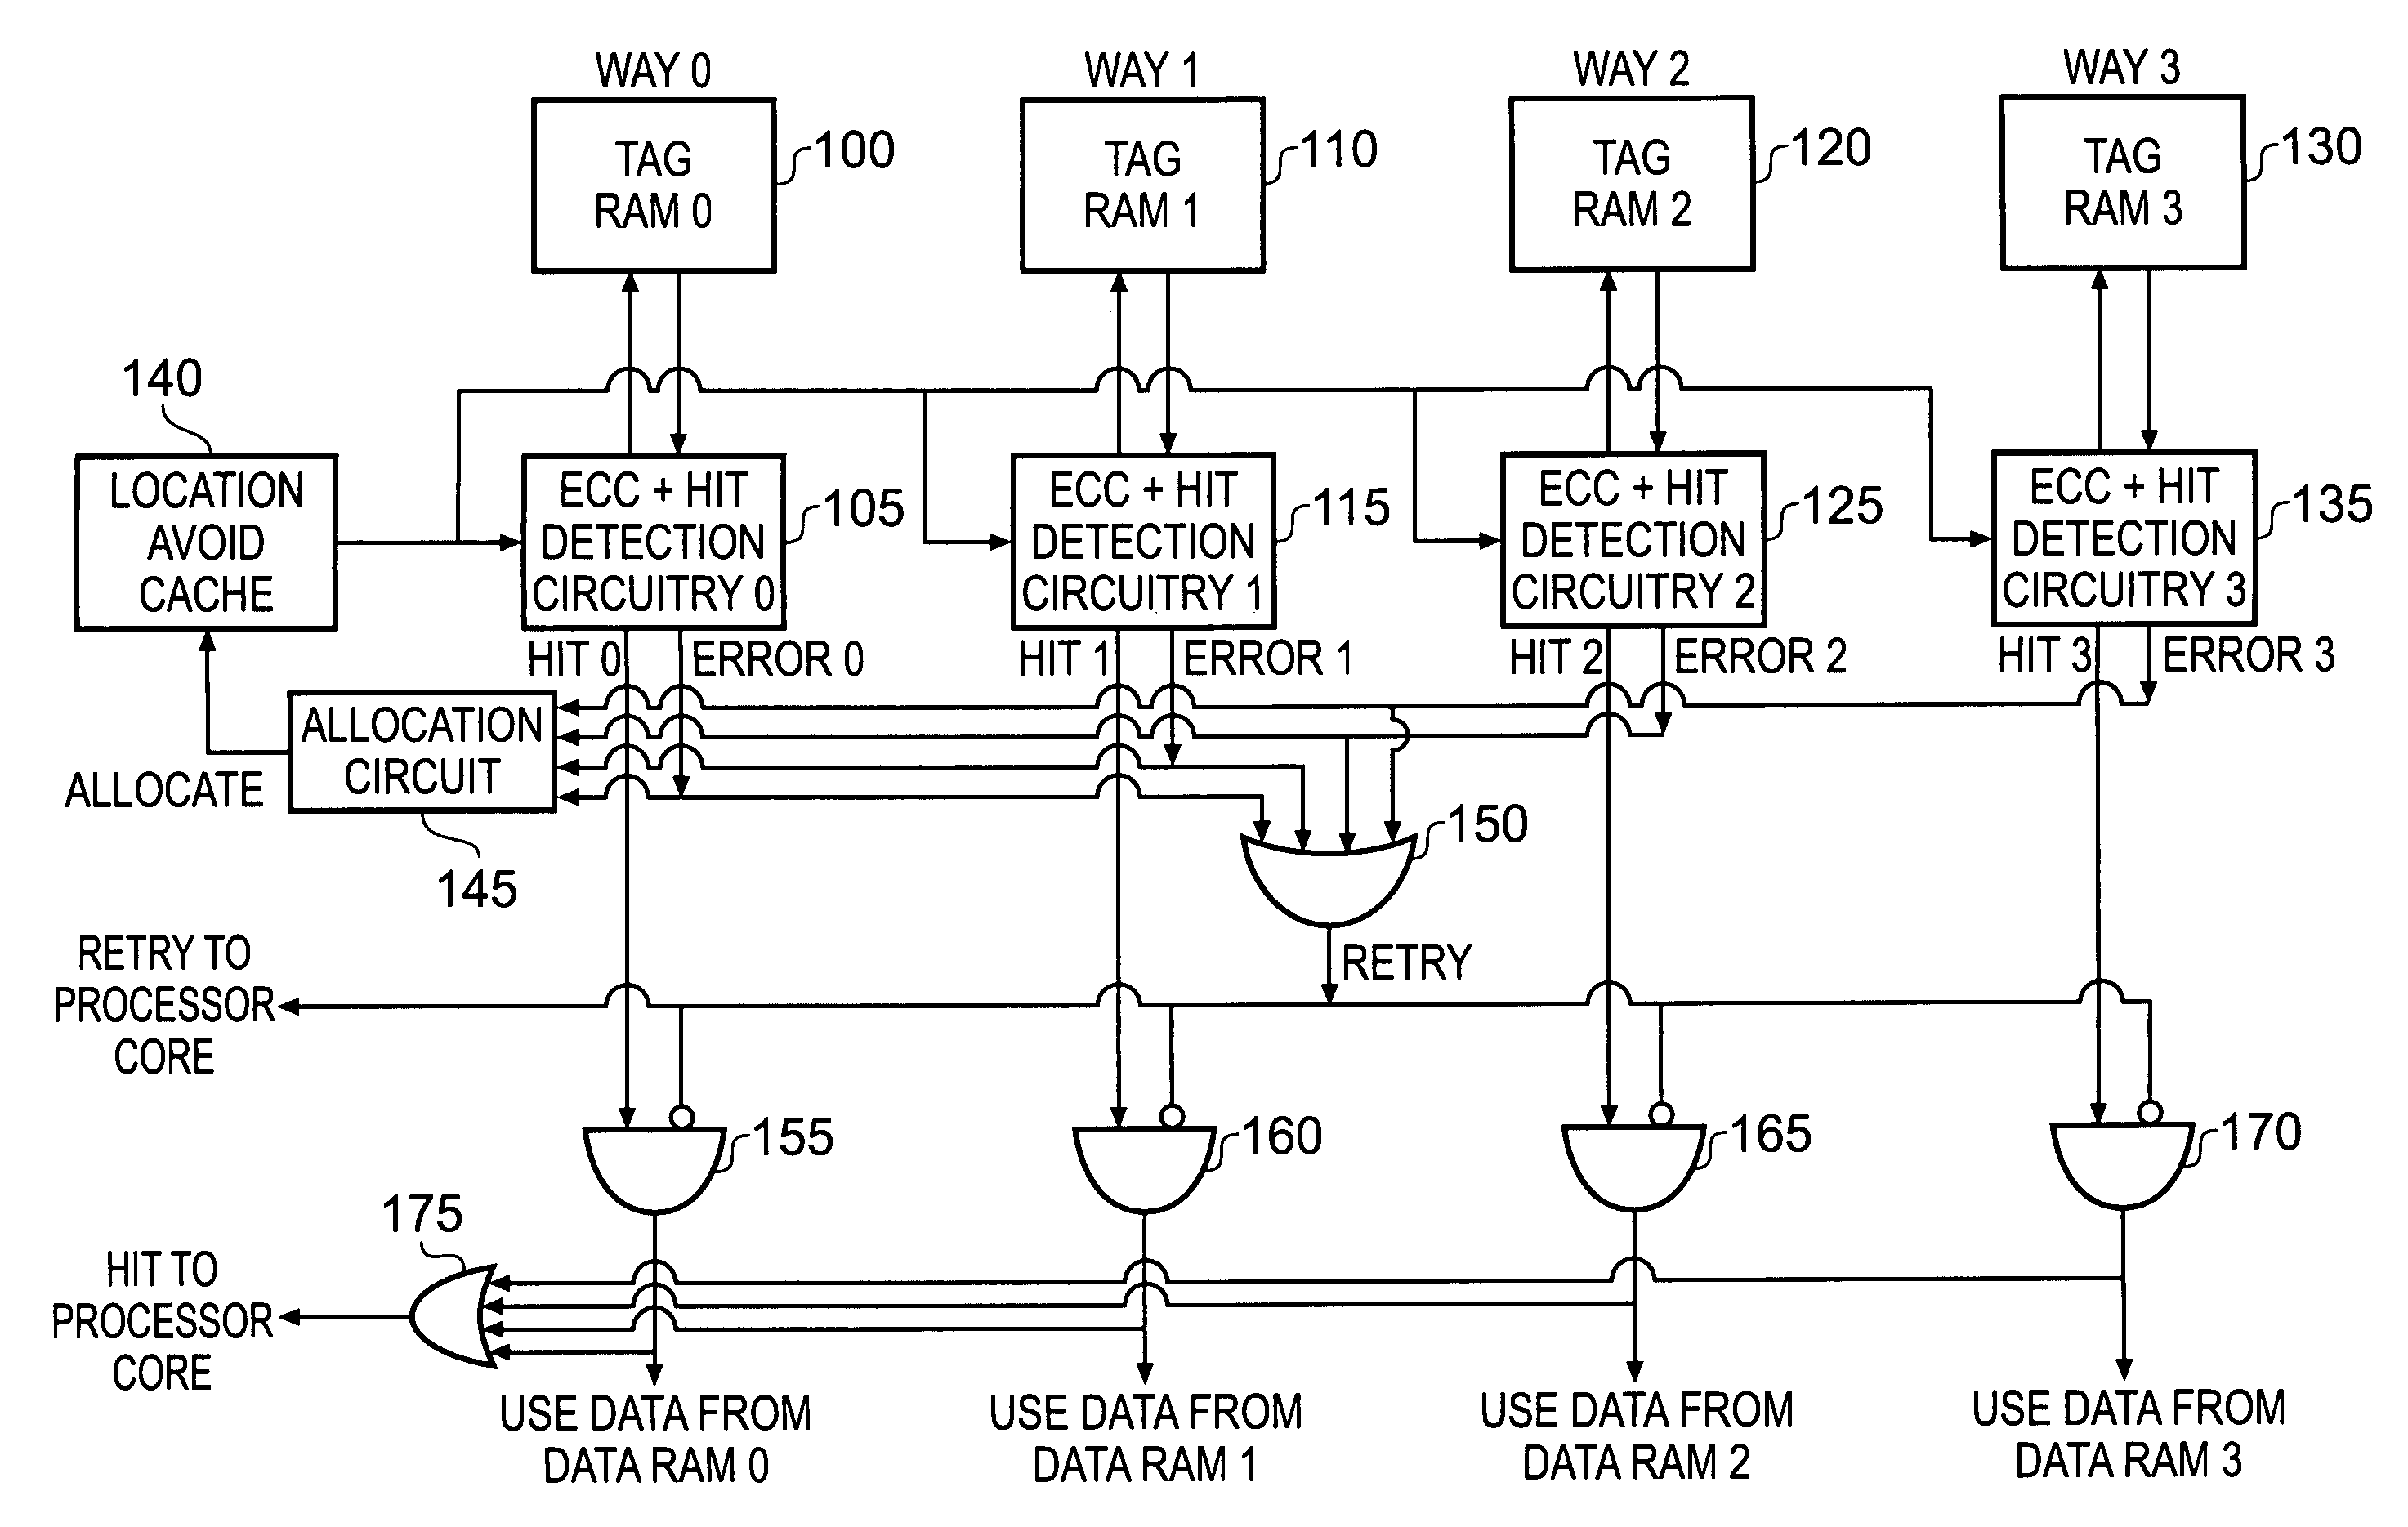 Handling of hard errors in a cache of a data processing apparatus